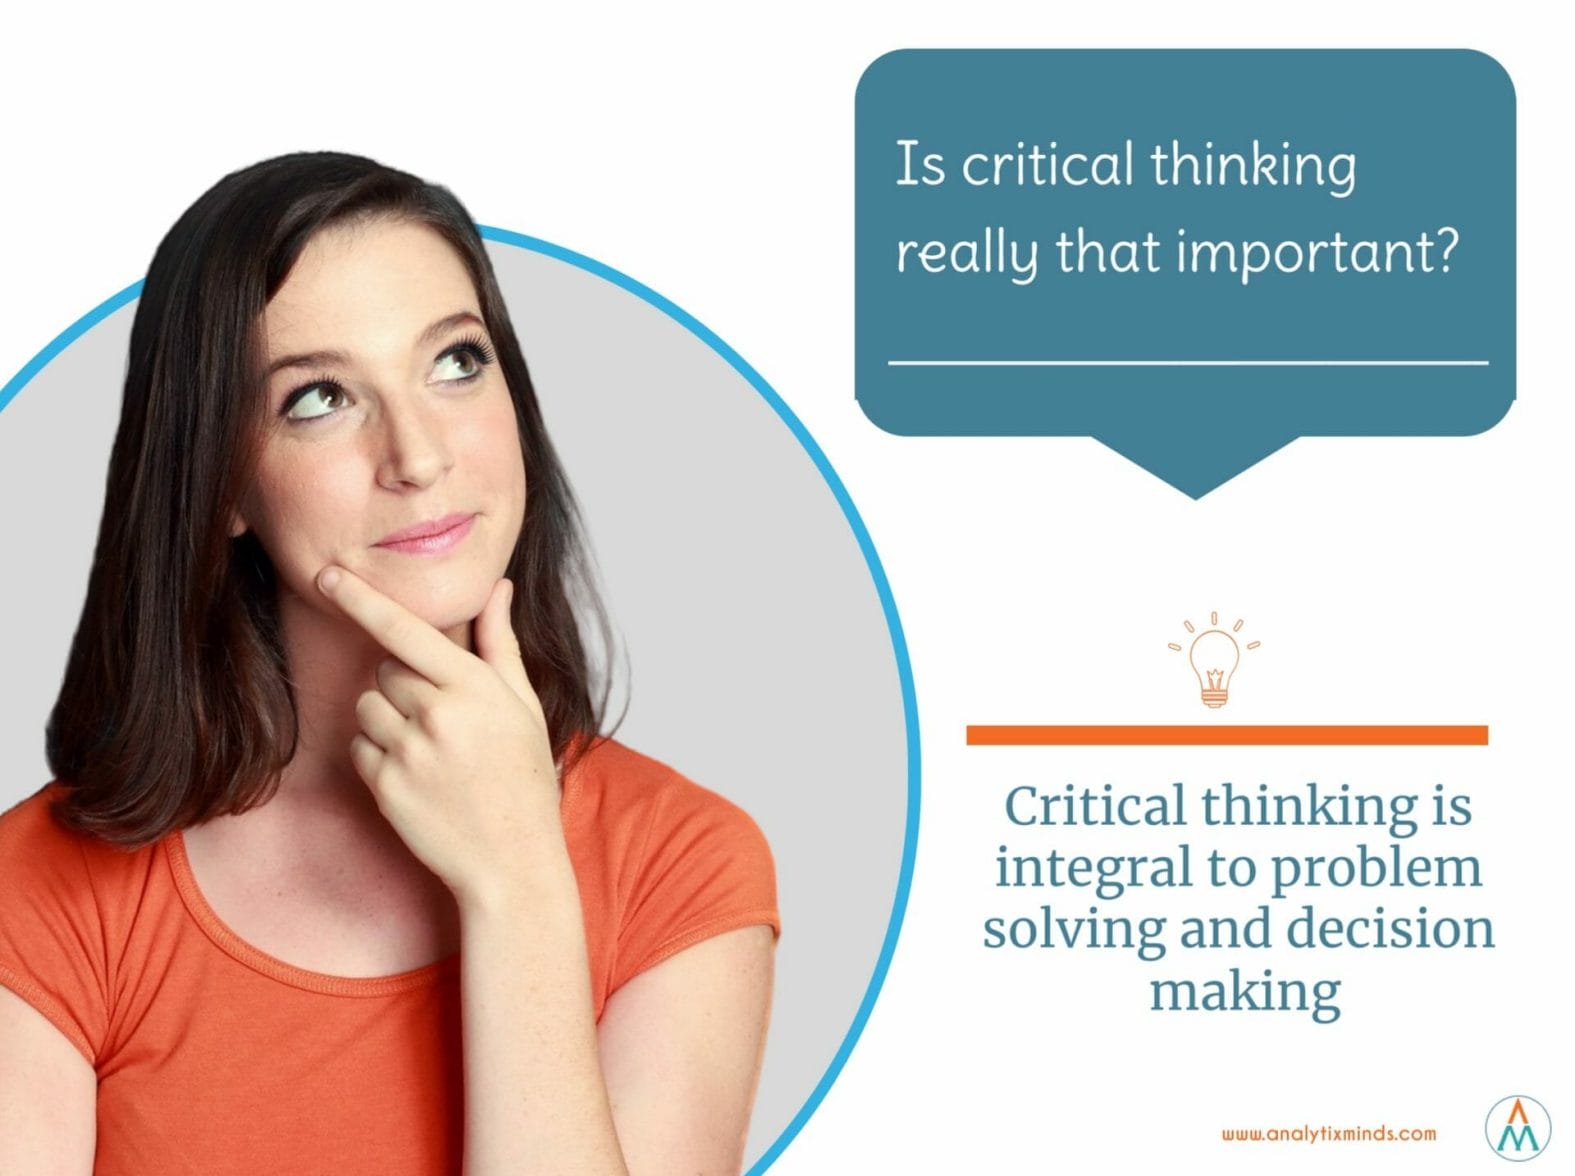 the importance of critical thinking